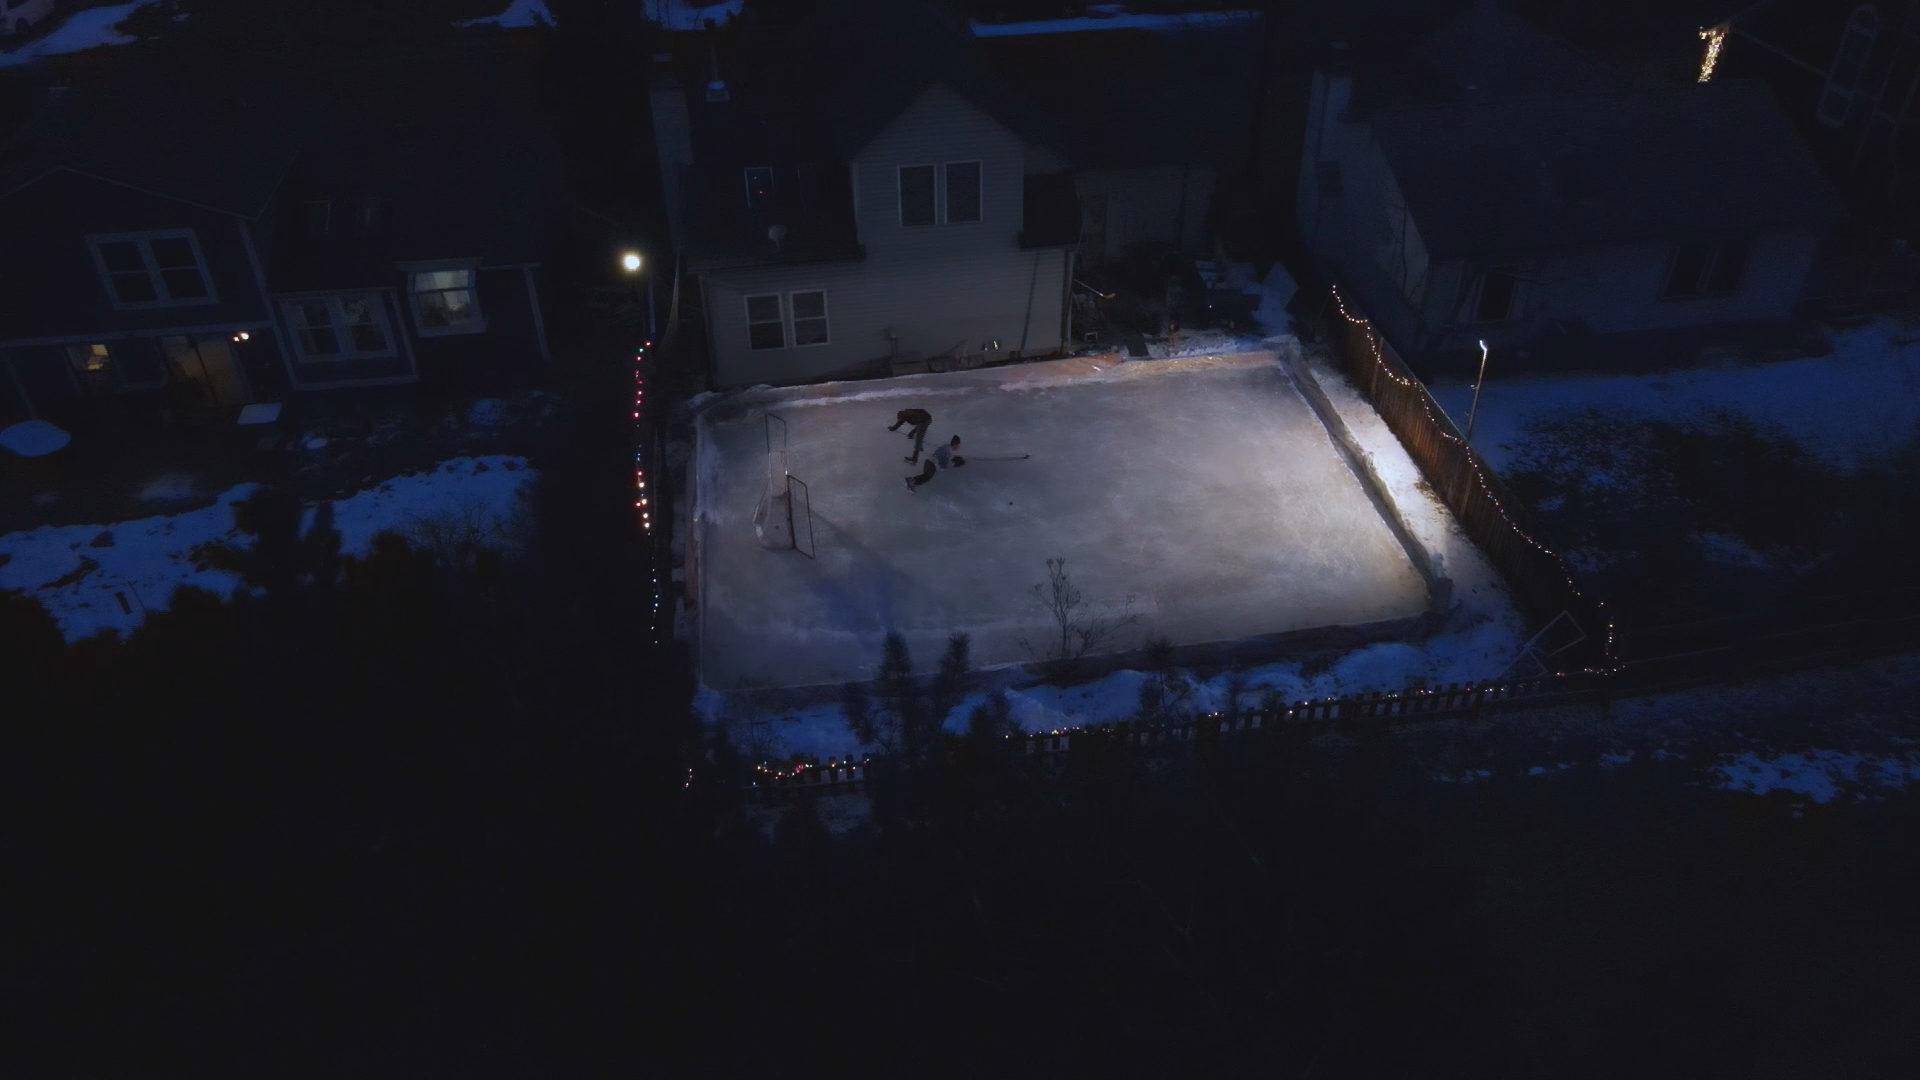 9NEWS Photojournalist Tom Cole looks back on the obsession that led to him turning his entire backyard into a family hockey rink each winter.